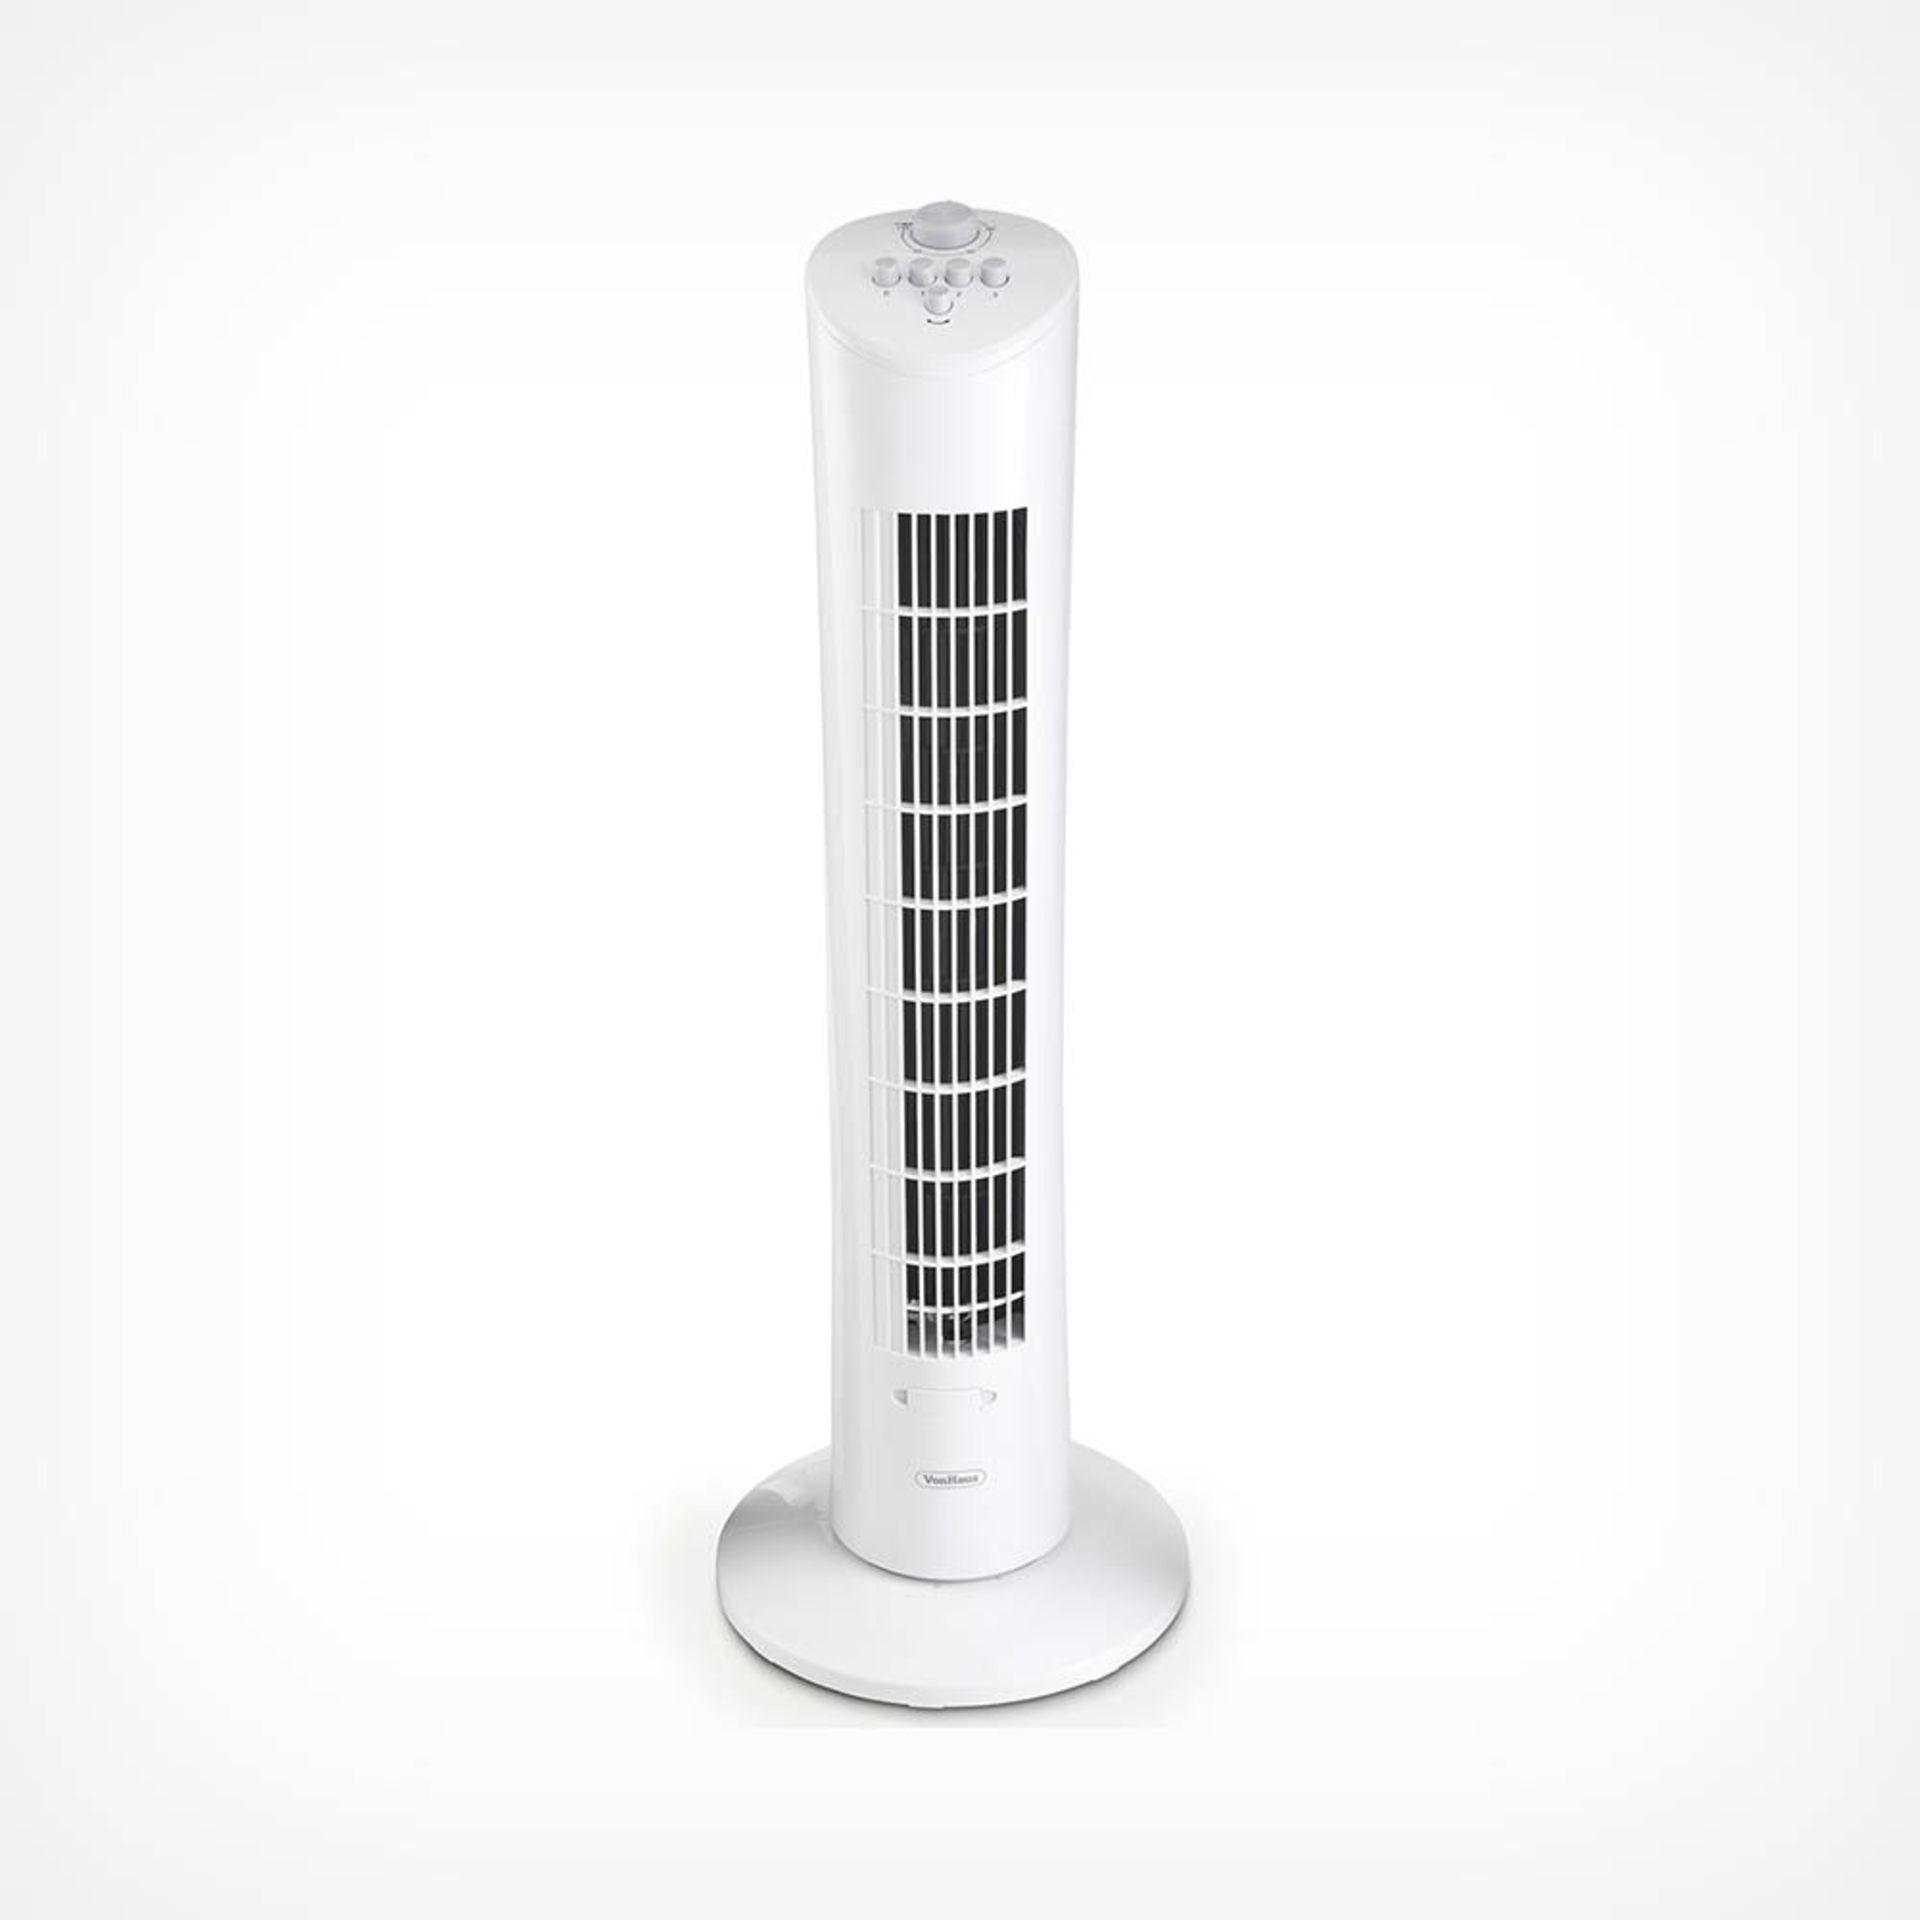 Portable 31" Tower Fan. - BI. When the heat is on, it can be difficult to keep your cool.